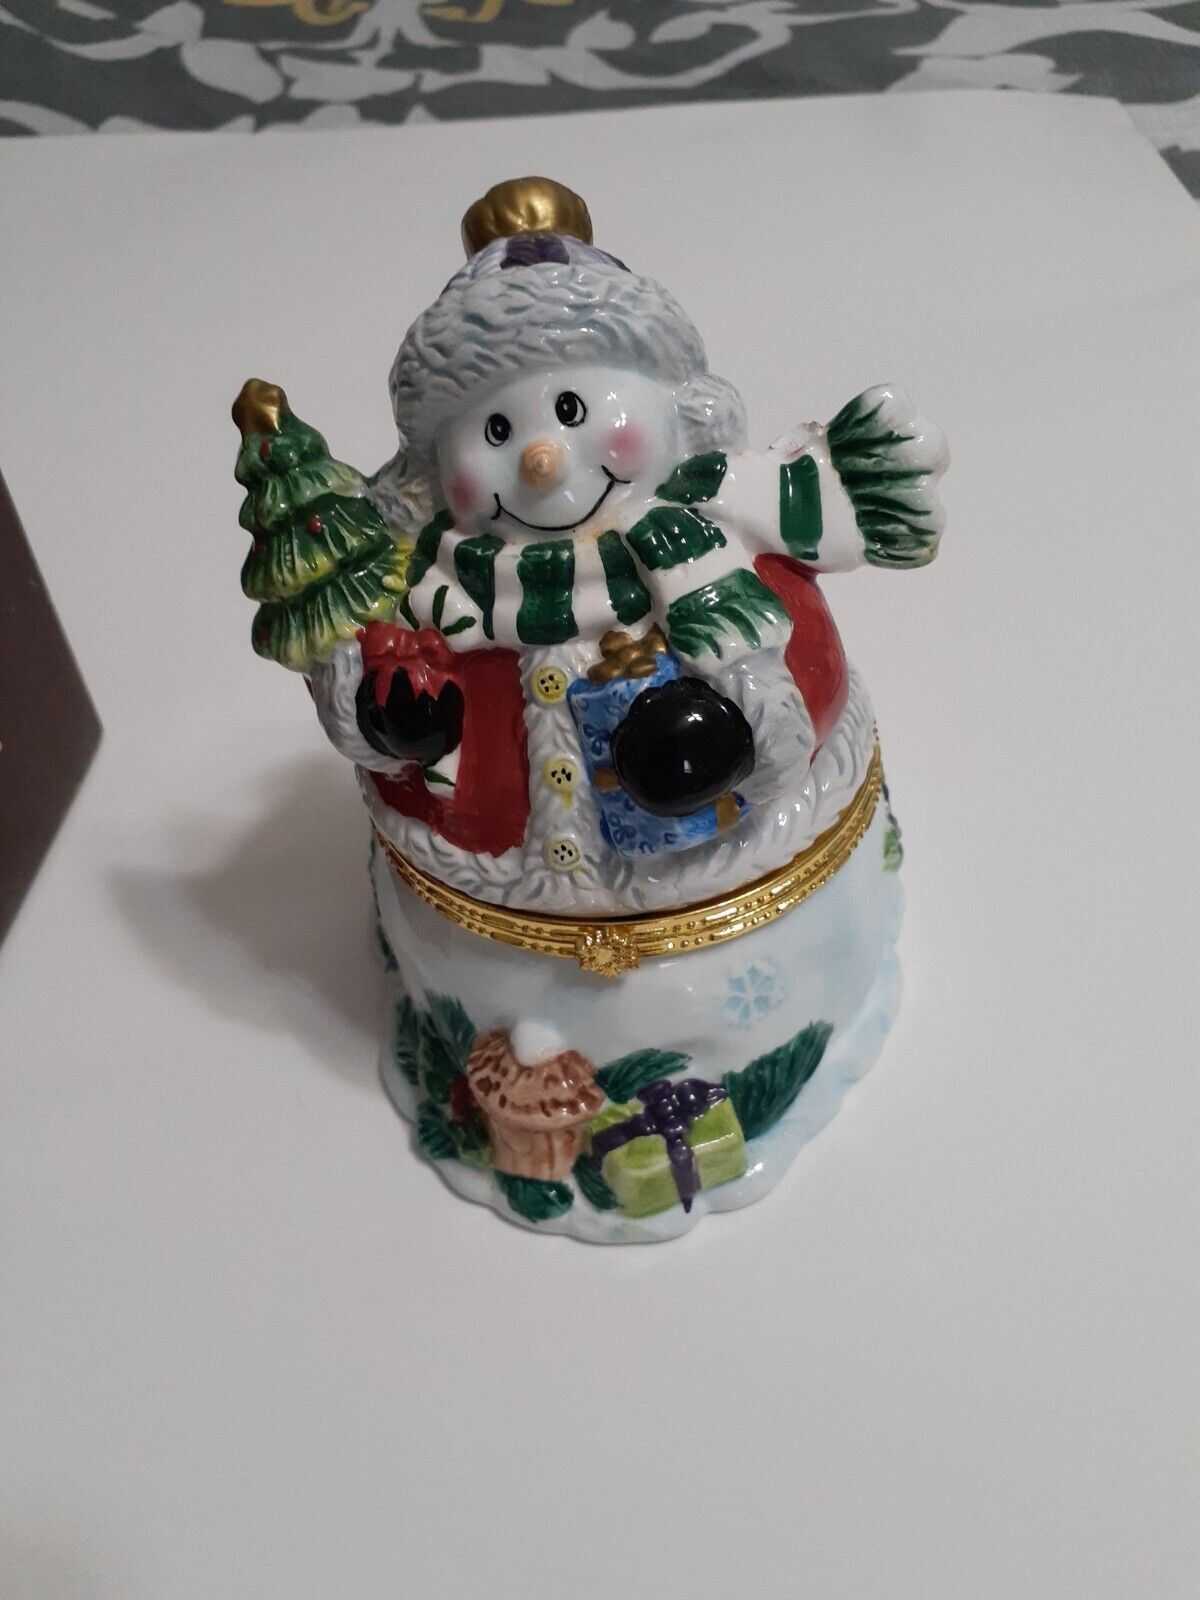 Vintage Hand Painted Ceramic Hinged Box Snowman from McClurkans store 60s-80s